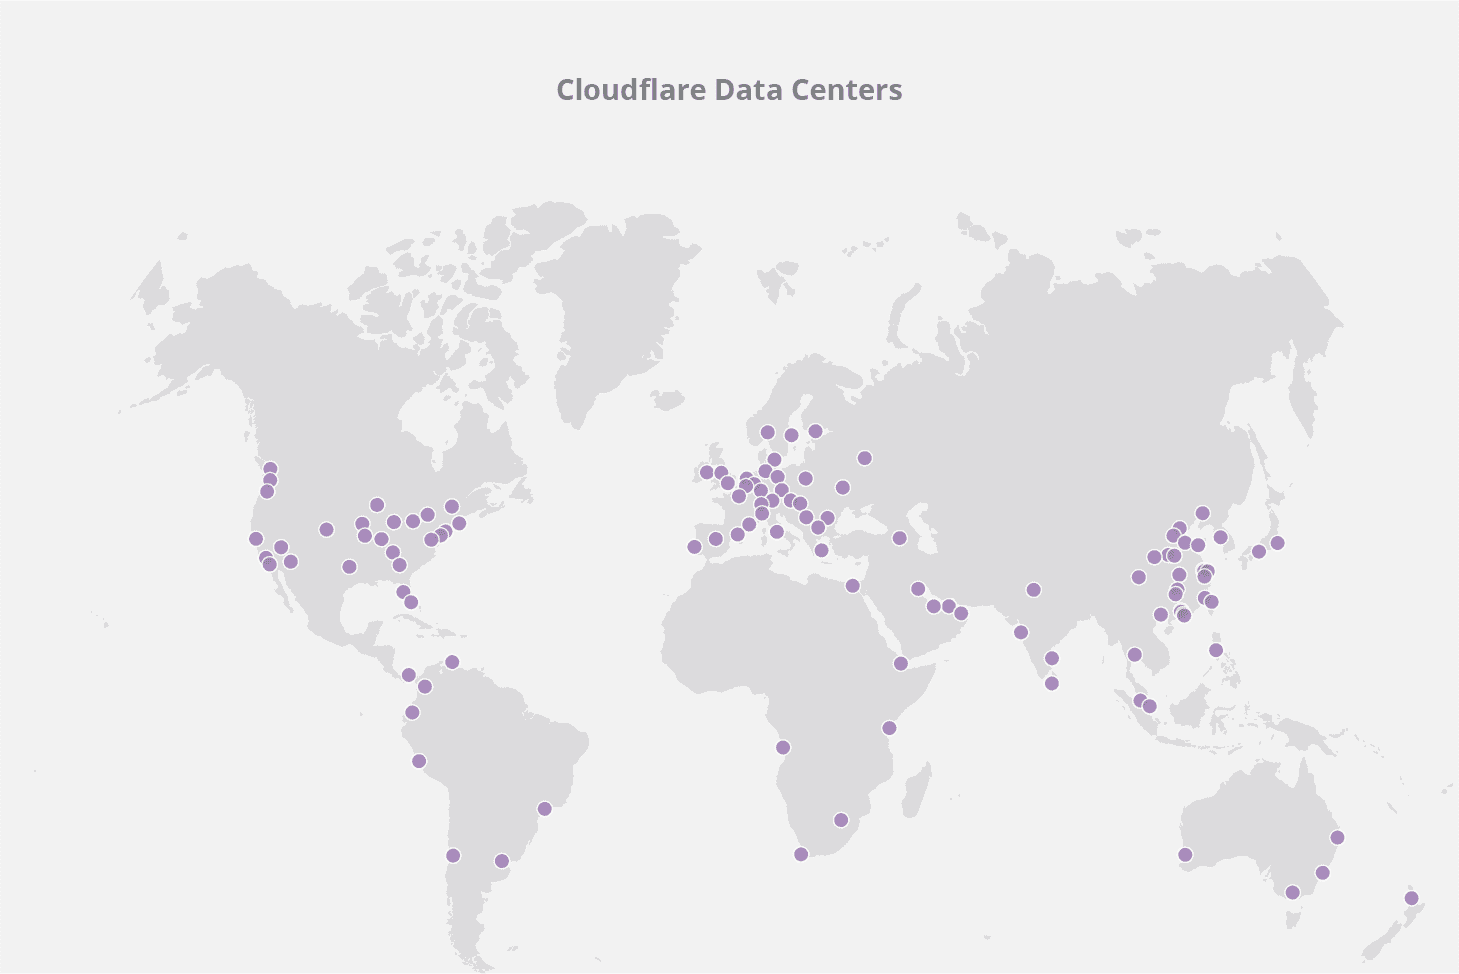 Map of cloudflare data centers